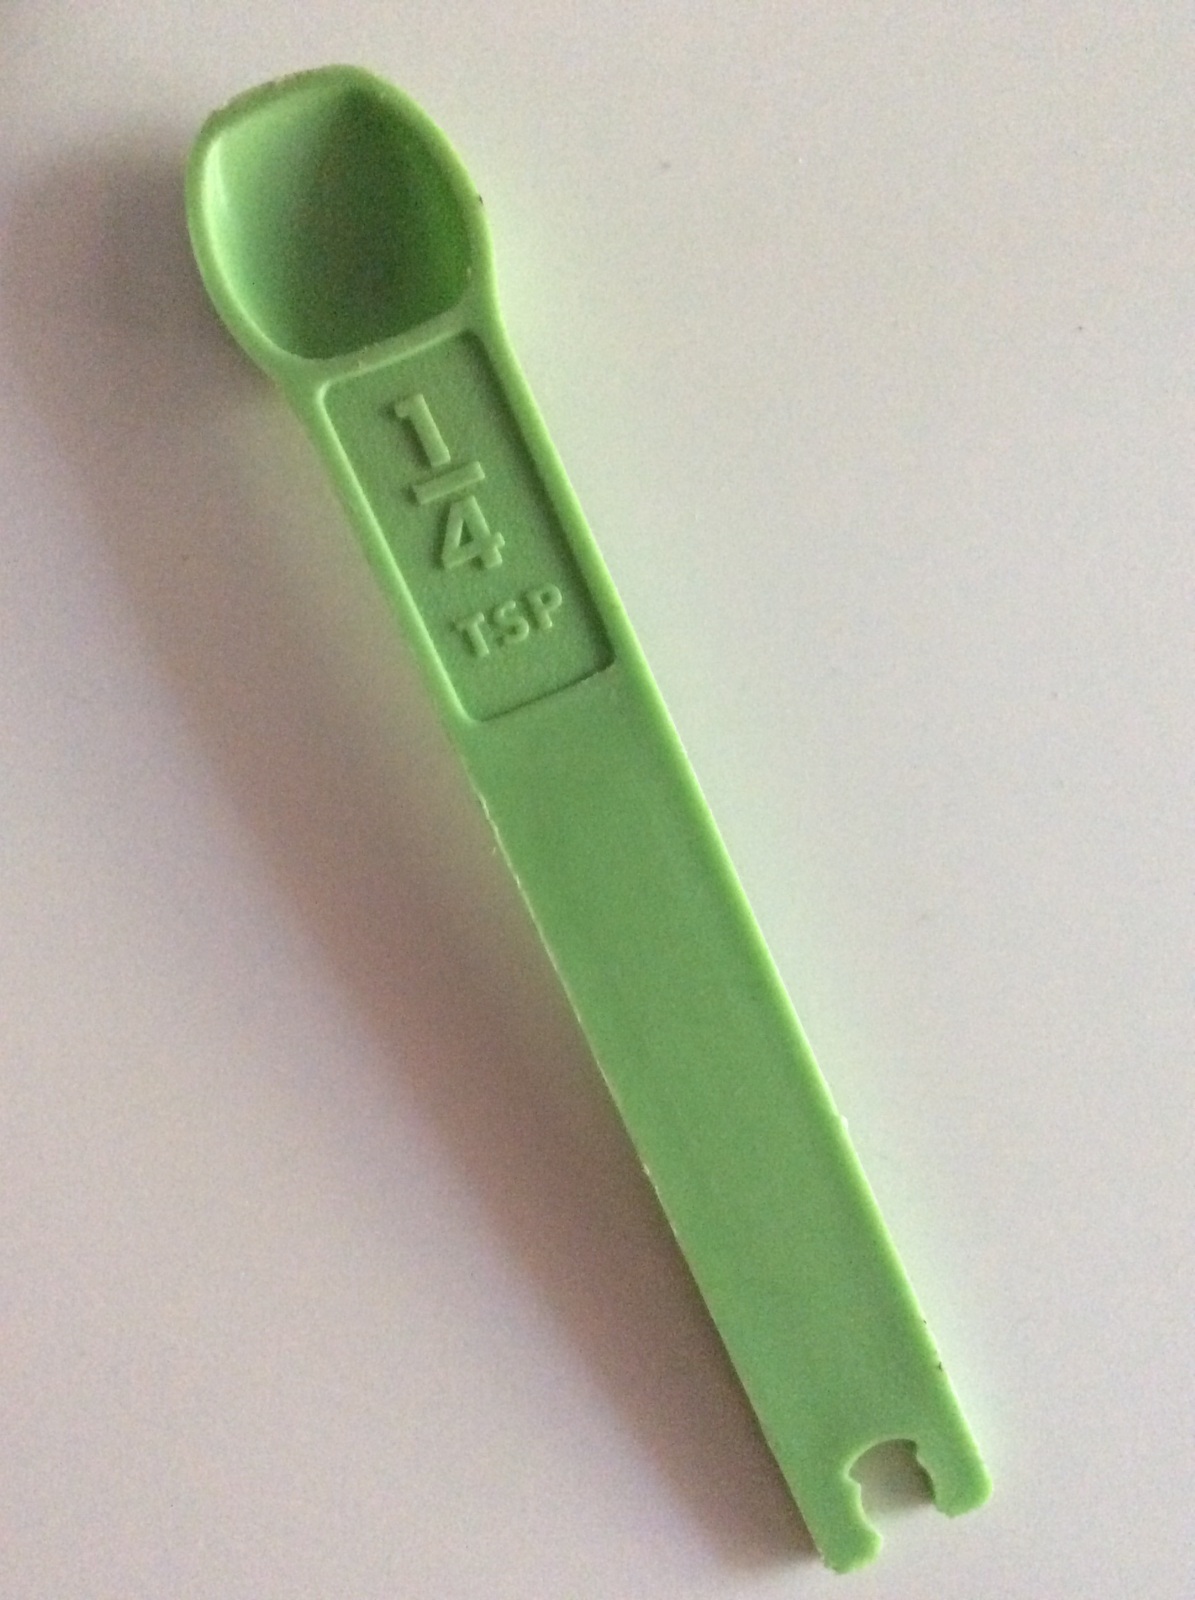 Tupperware Replacement Measuring Spoon 1/4 TSP Green - $6.55